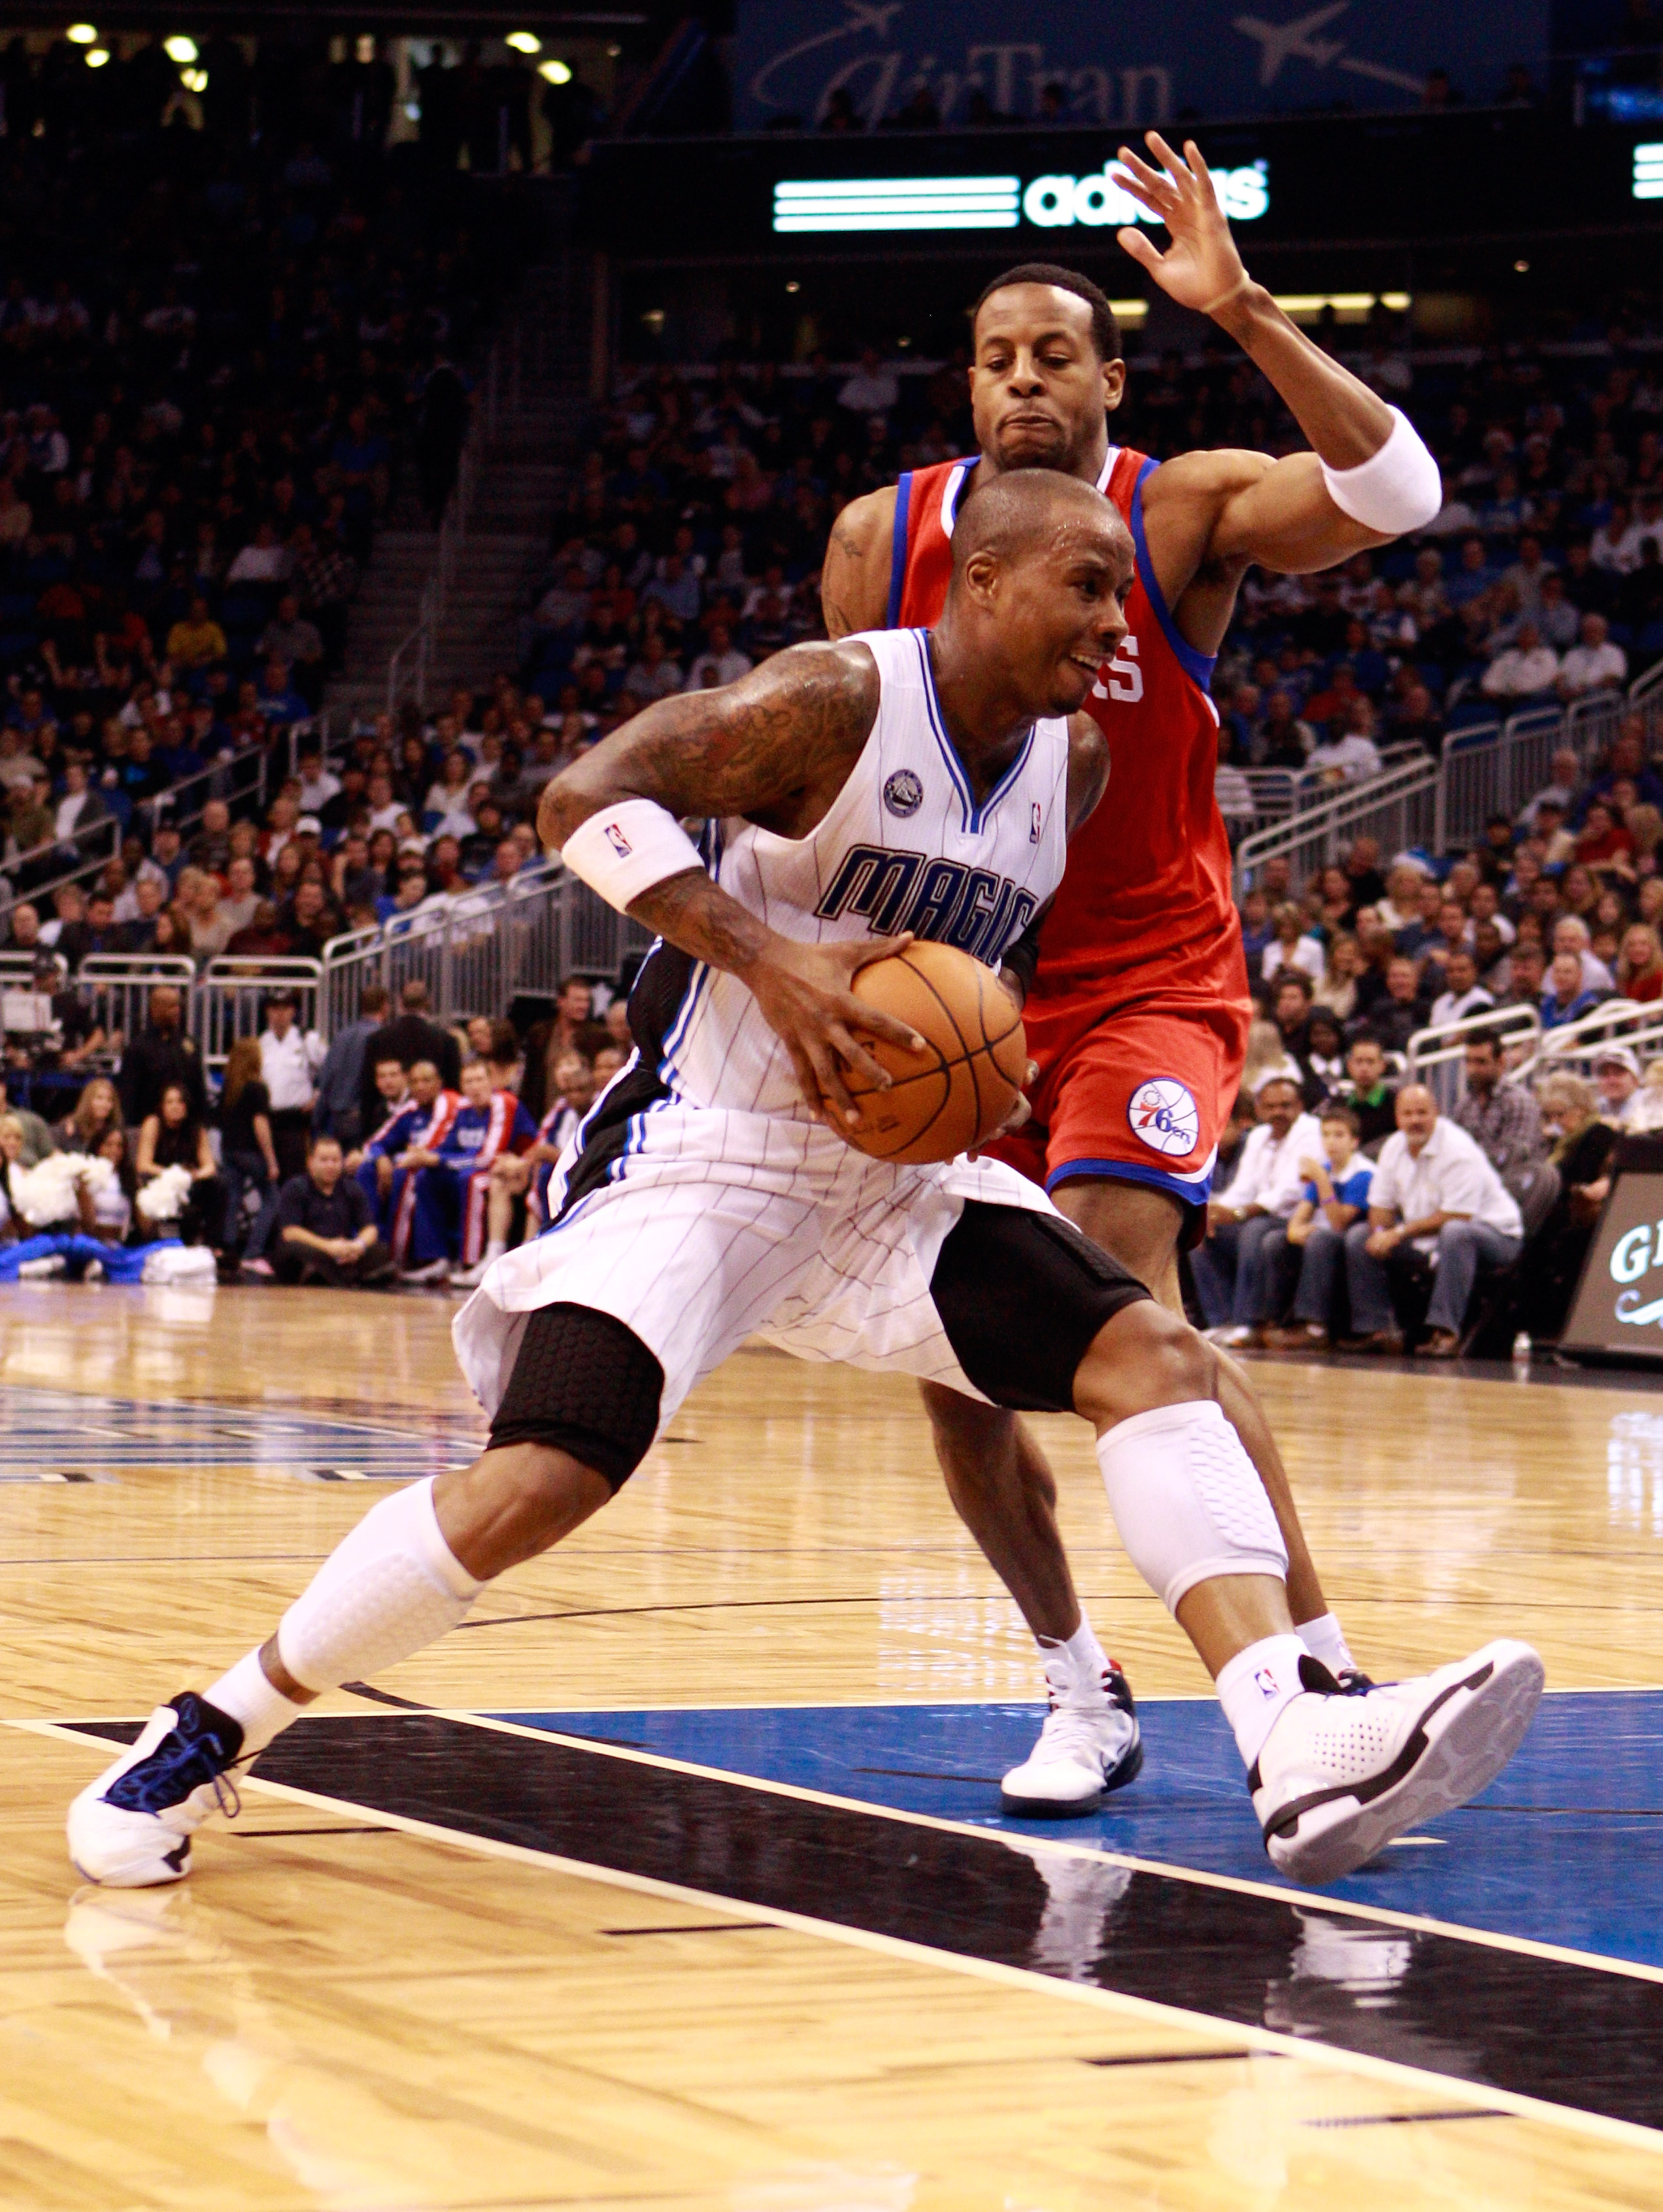 ORLANDO, FL - DECEMBER 18:  Quentin Richardson #5 of the Orlando Magic drives against Andre Iguodala #9 of the Philadelphia 76ers during the game at Amway Arena on December 18, 2010 in Orlando, Florida.  NOTE TO USER: User expressly acknowledges and agree